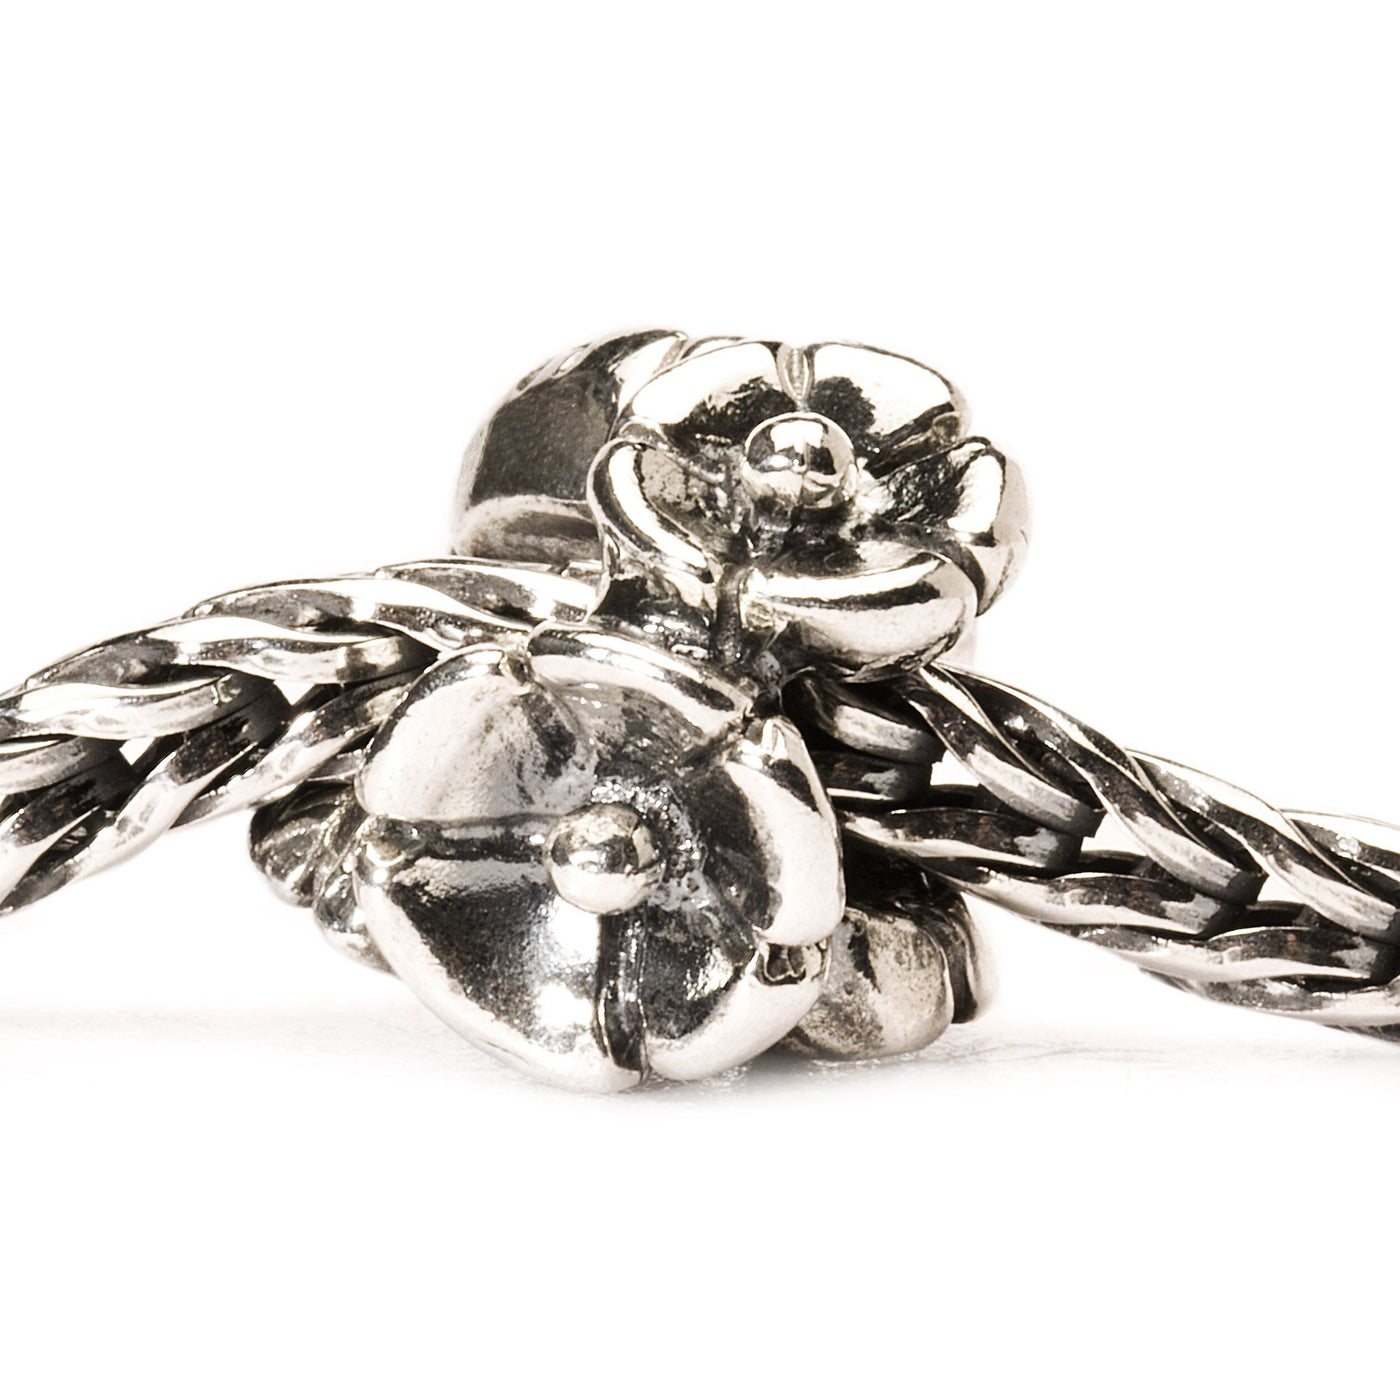 Forget-me-not - Trollbeads Canada